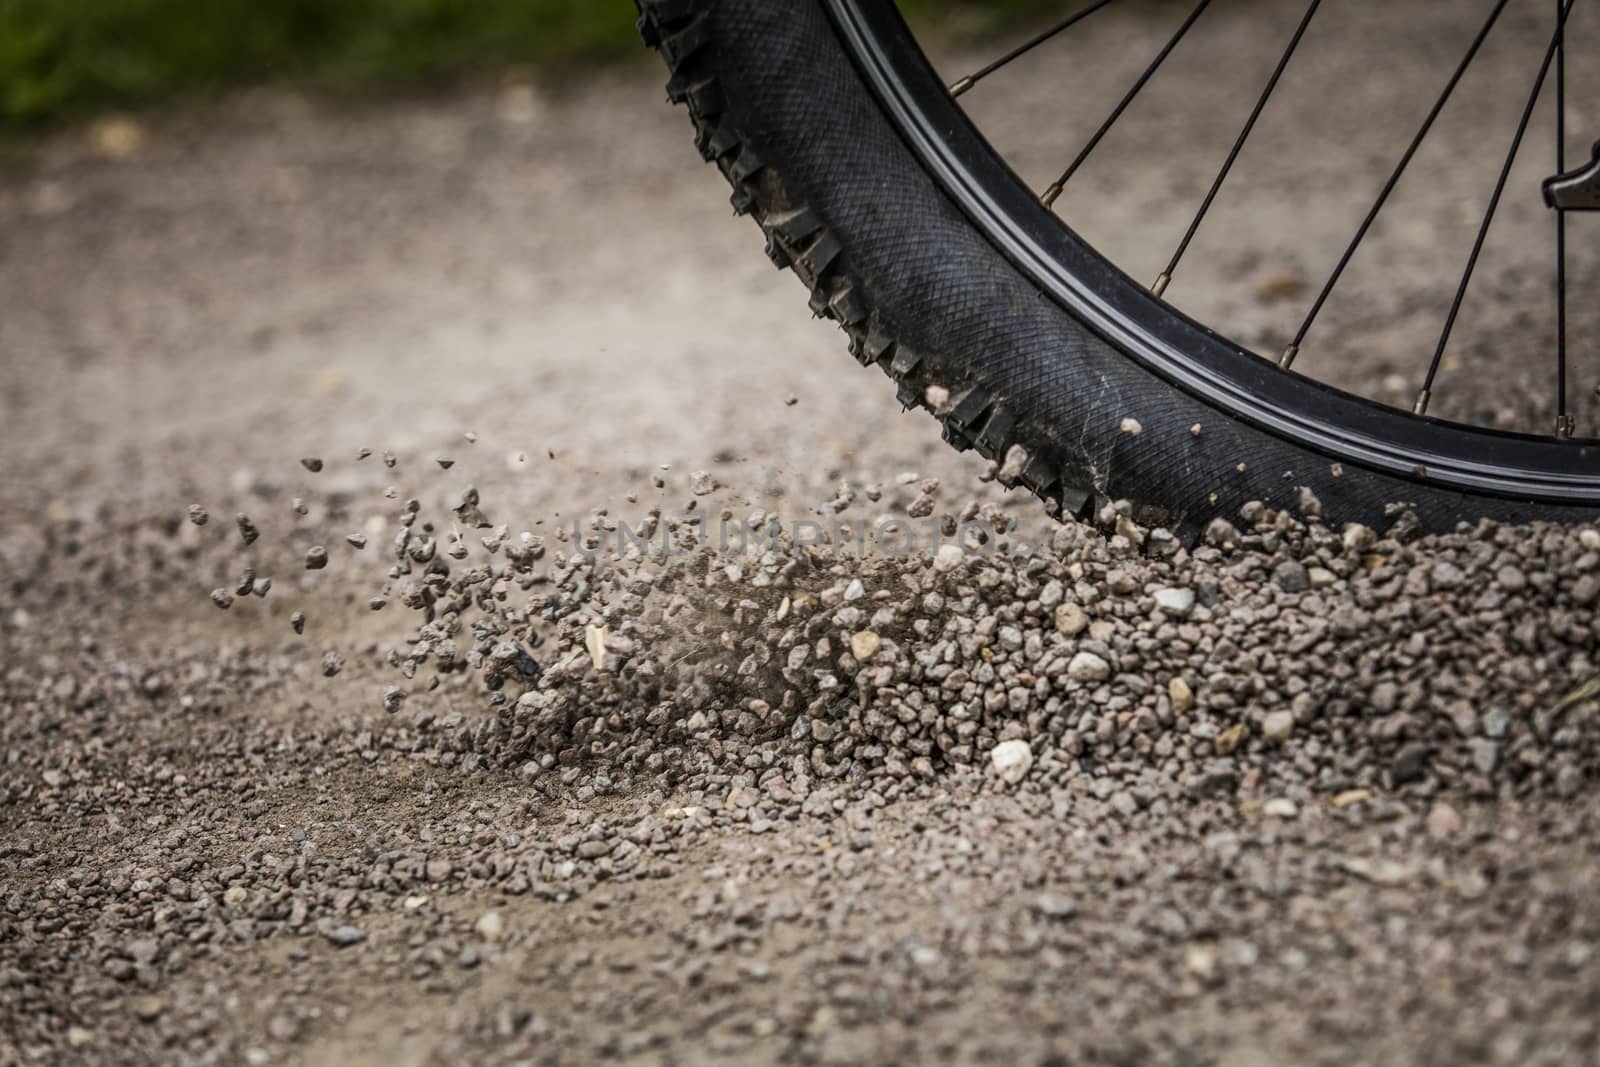 Tealby, Lincolnshire, UK, July 2017, Bike tire kicking up stones by ElectricEggPhoto